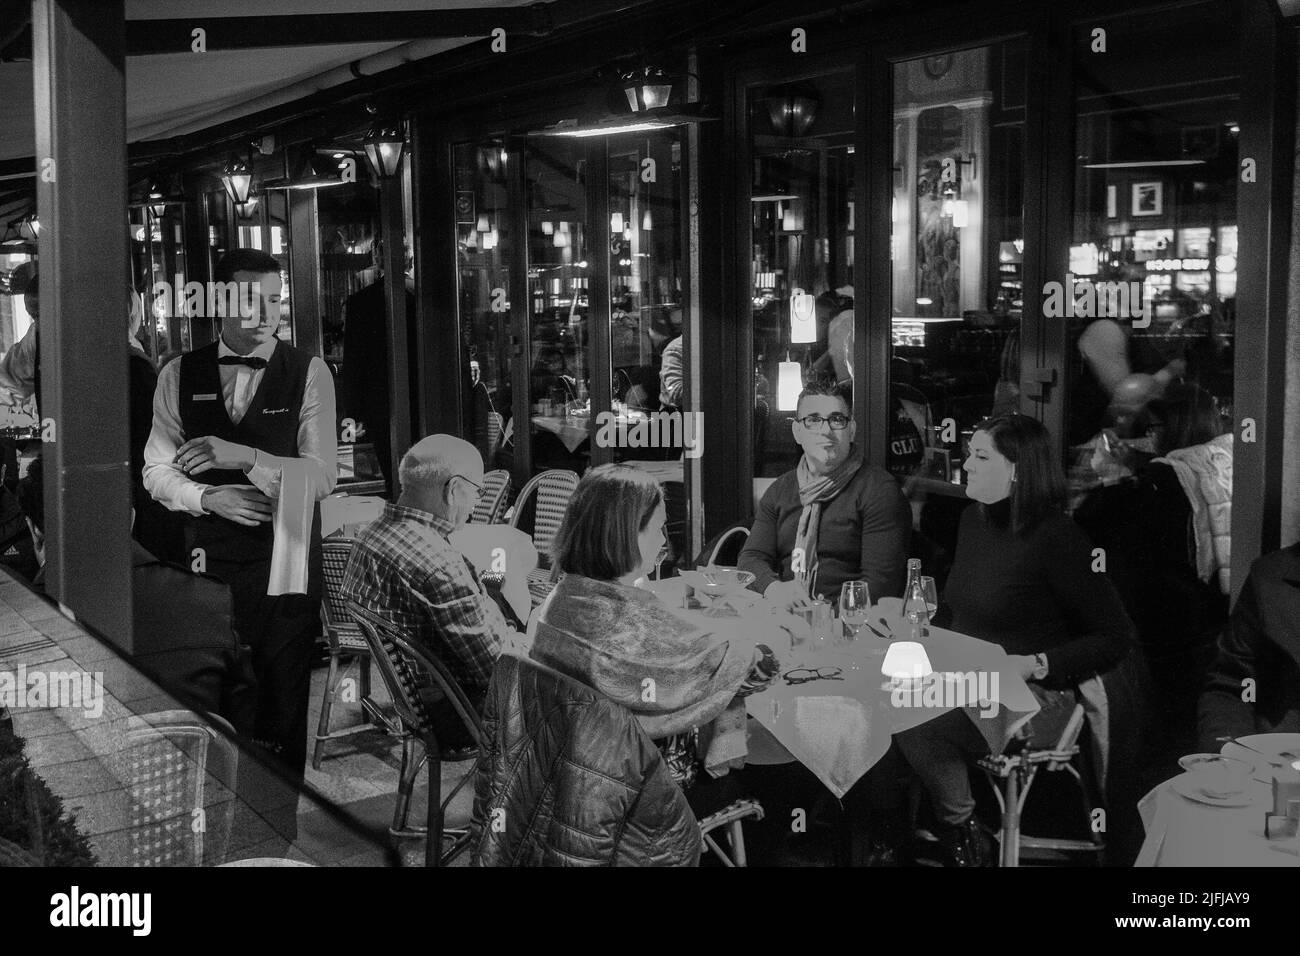 05-14-2016  Paris. People in  cafe on  Champs Elysees  street  in Paris.  good mood in one of the best places in the world Stock Photo